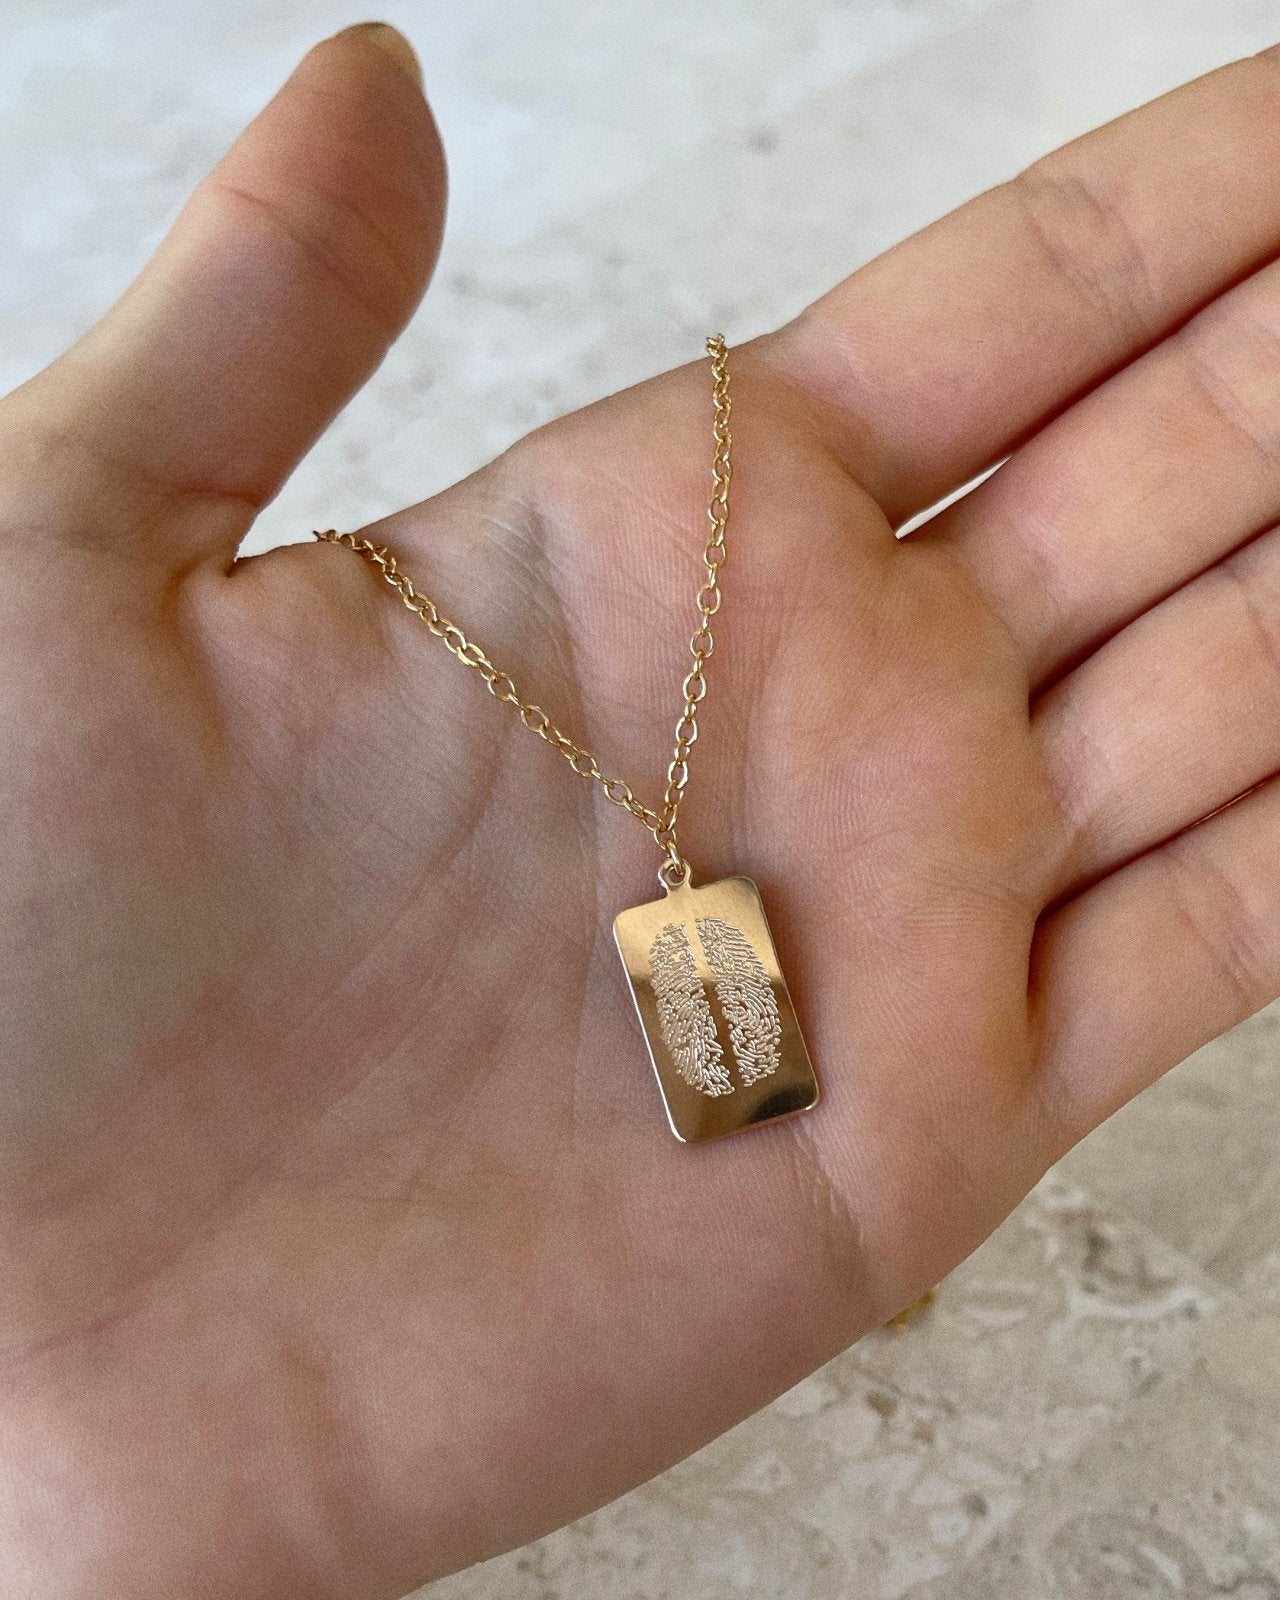 DOUBLE FINGERPRINT TAG NECKLACE- 14k Yellow Gold - The Littl - 14k Yellow Gold Fill - Classic Chain